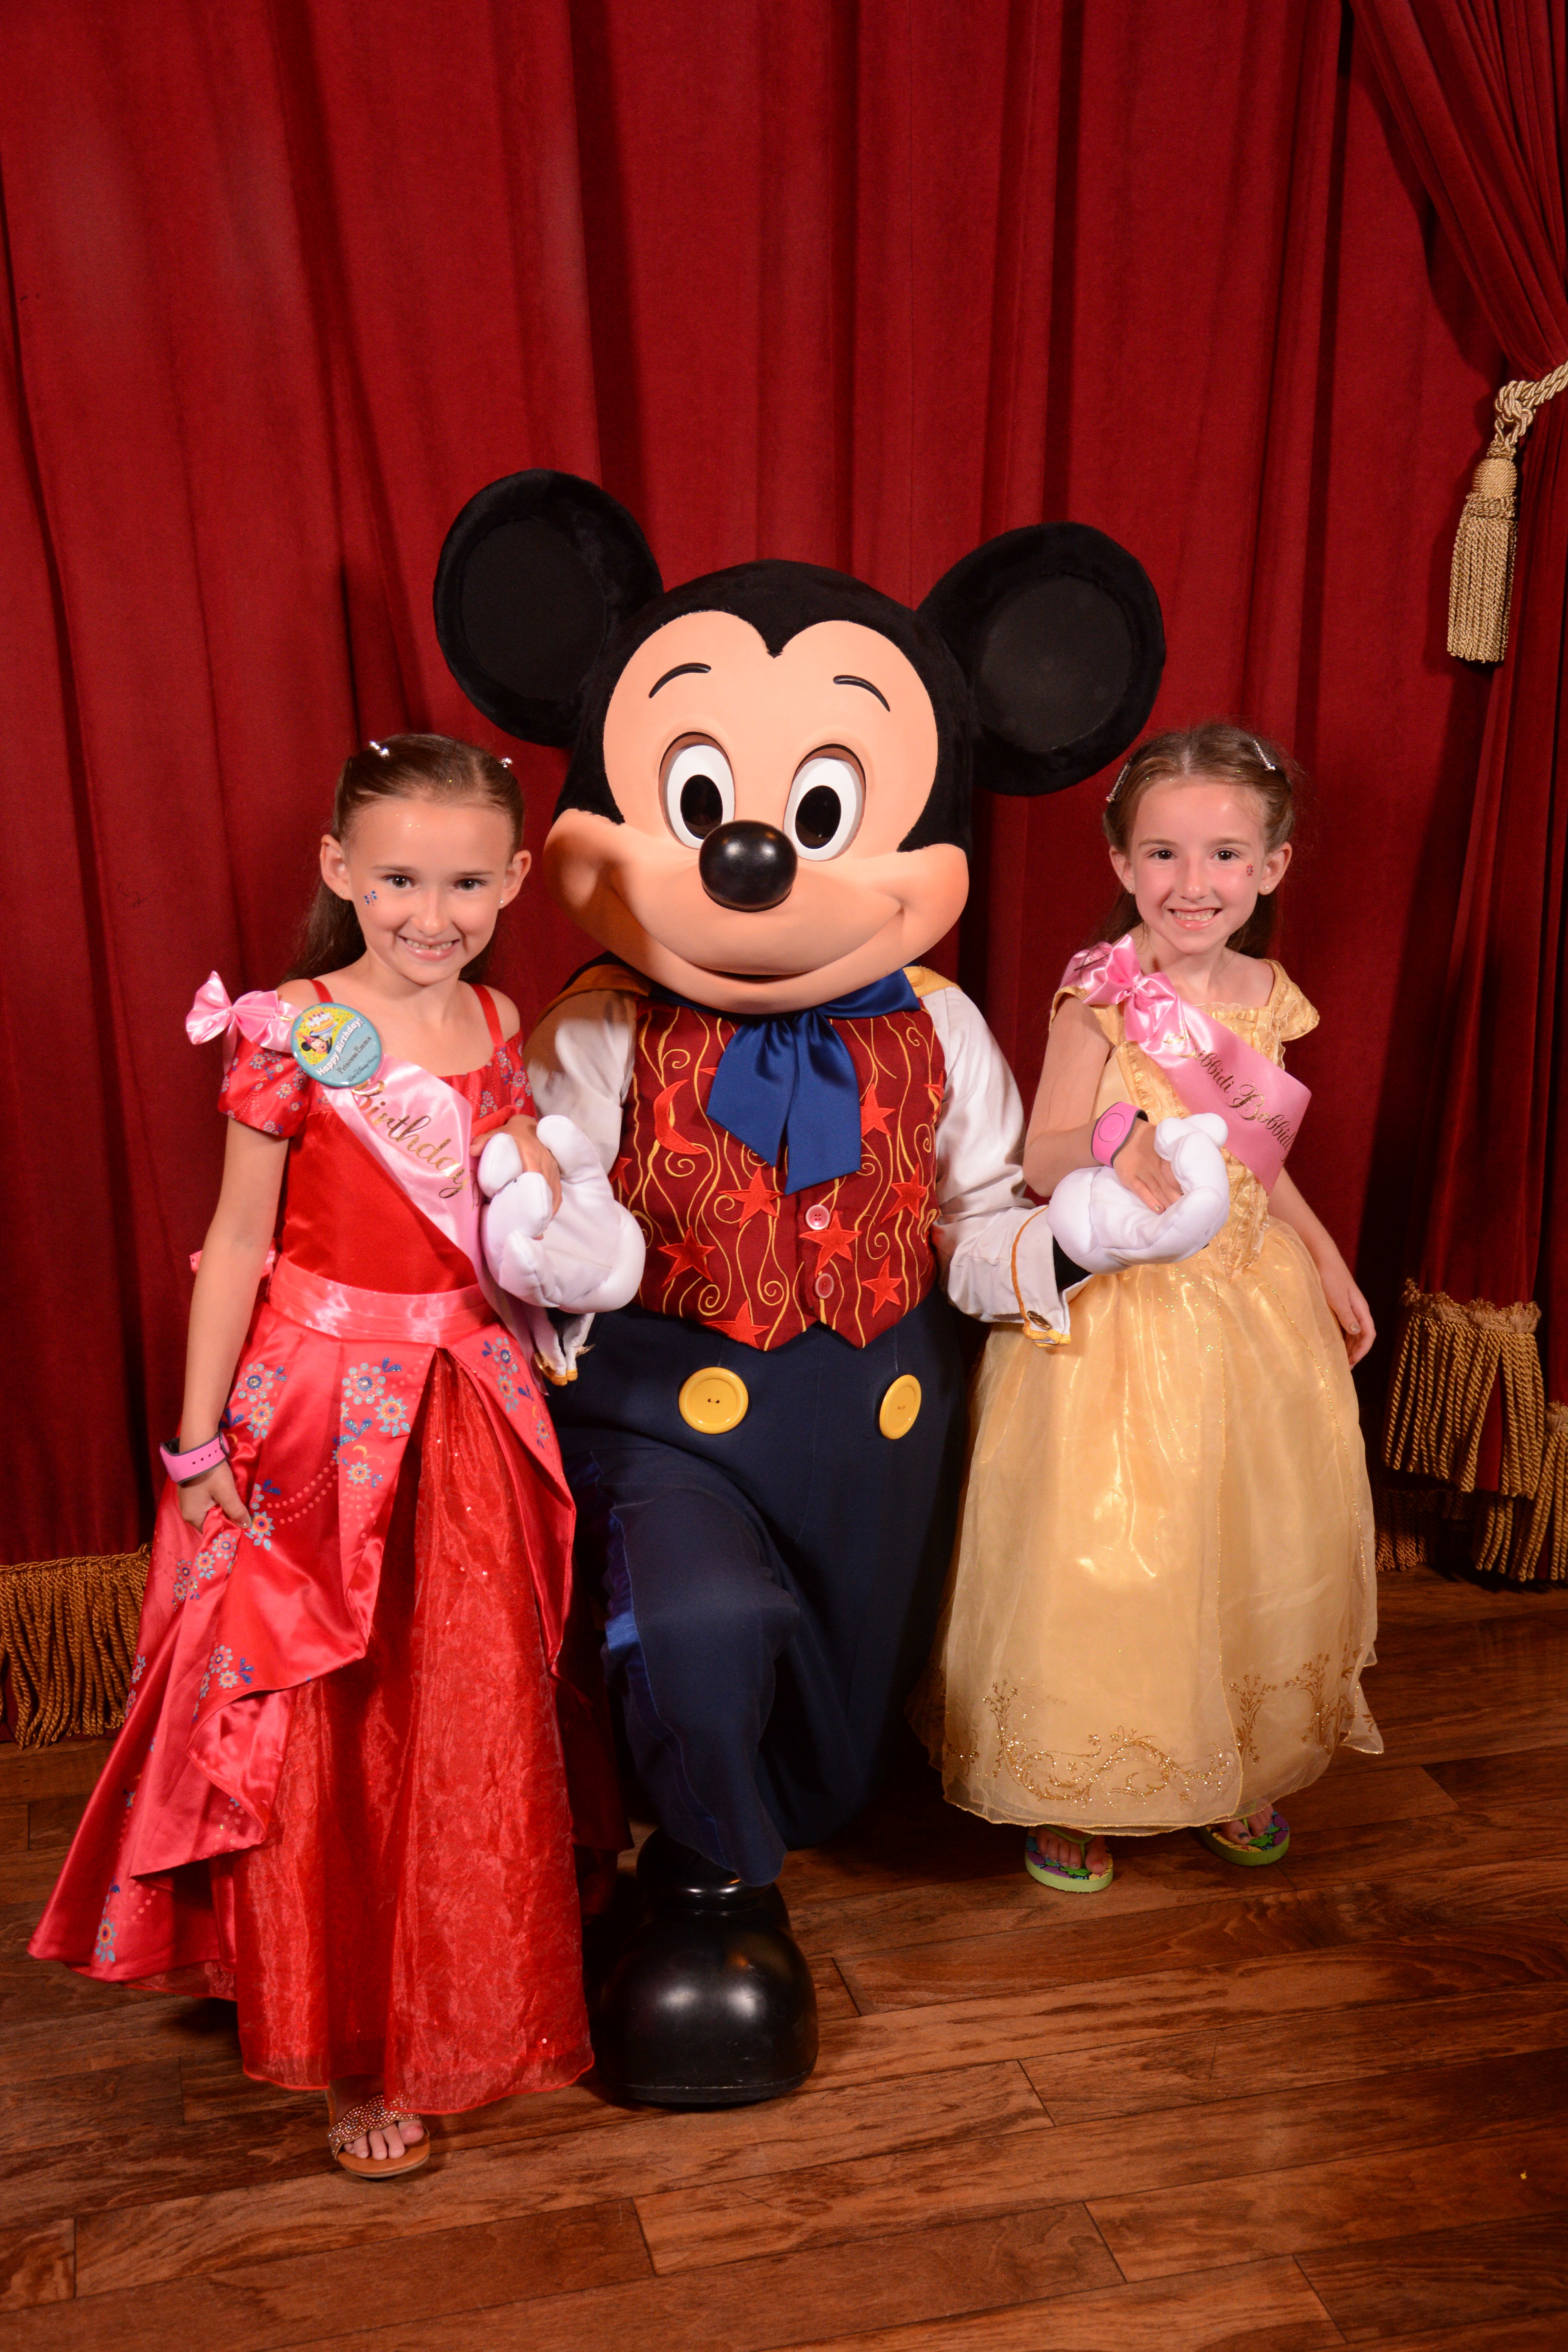 The Girls and Disney Mickey Mouse at Magic Kingdom Town Square